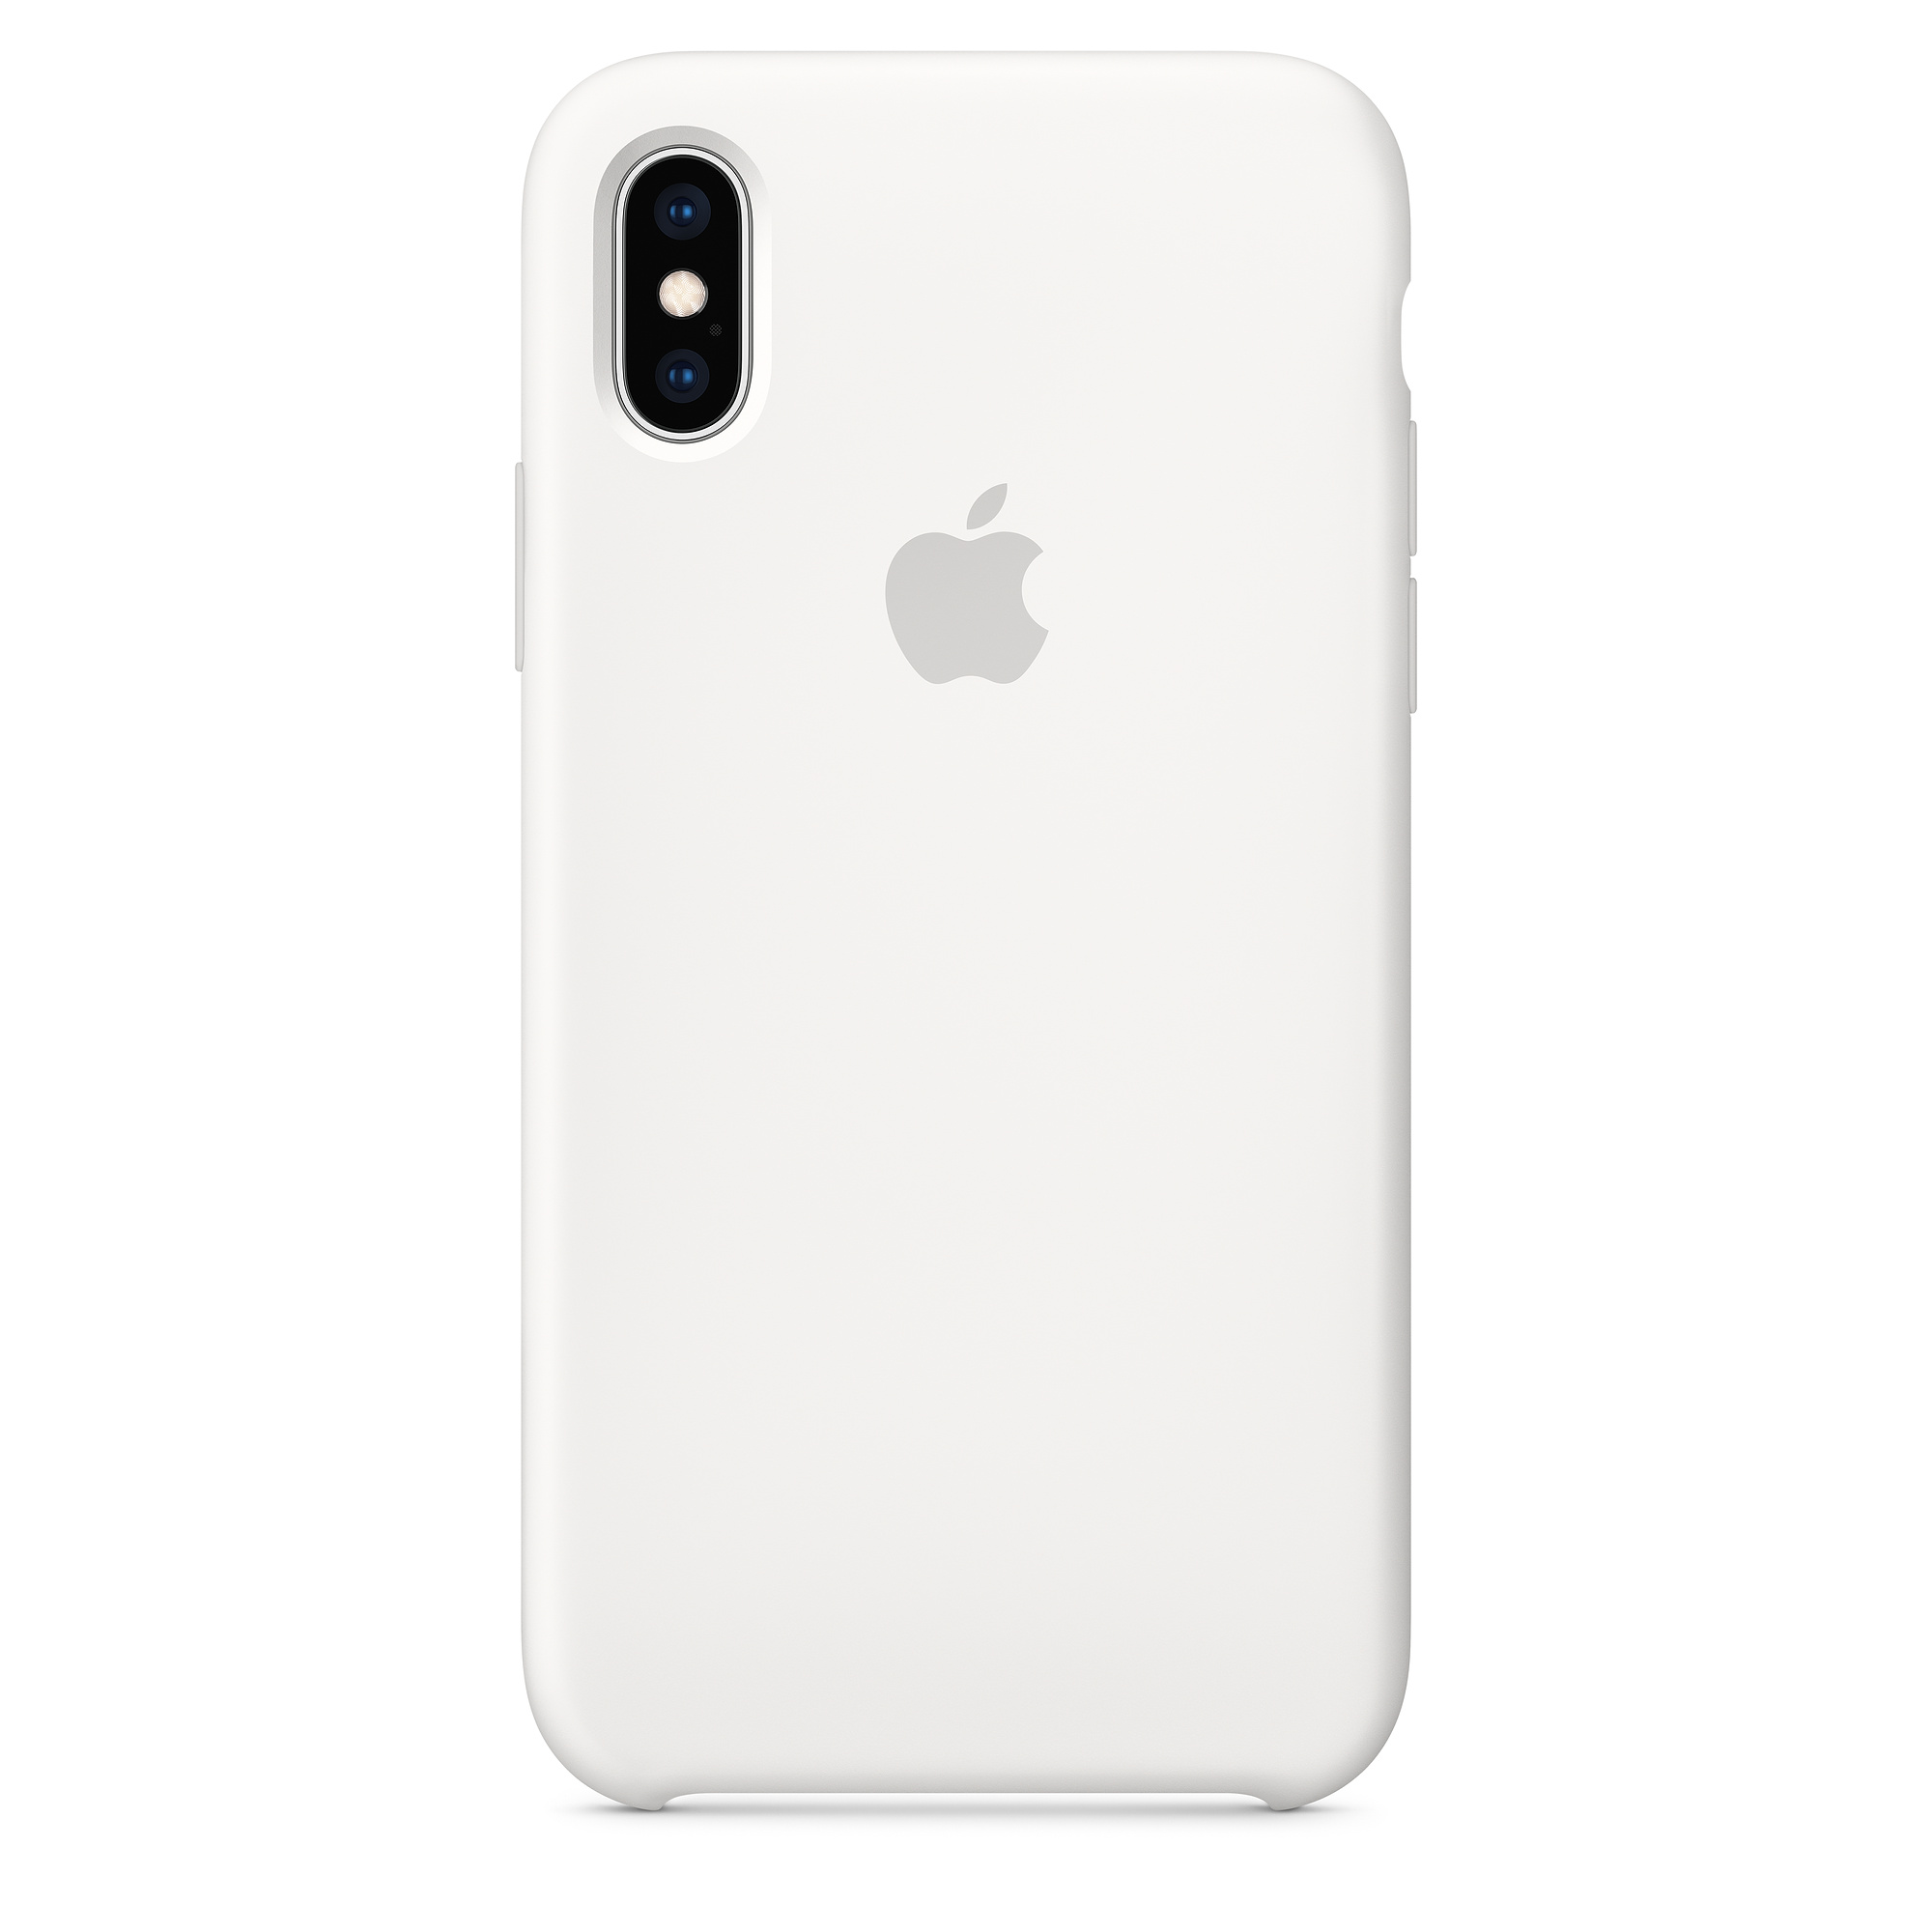 Iphone XR white